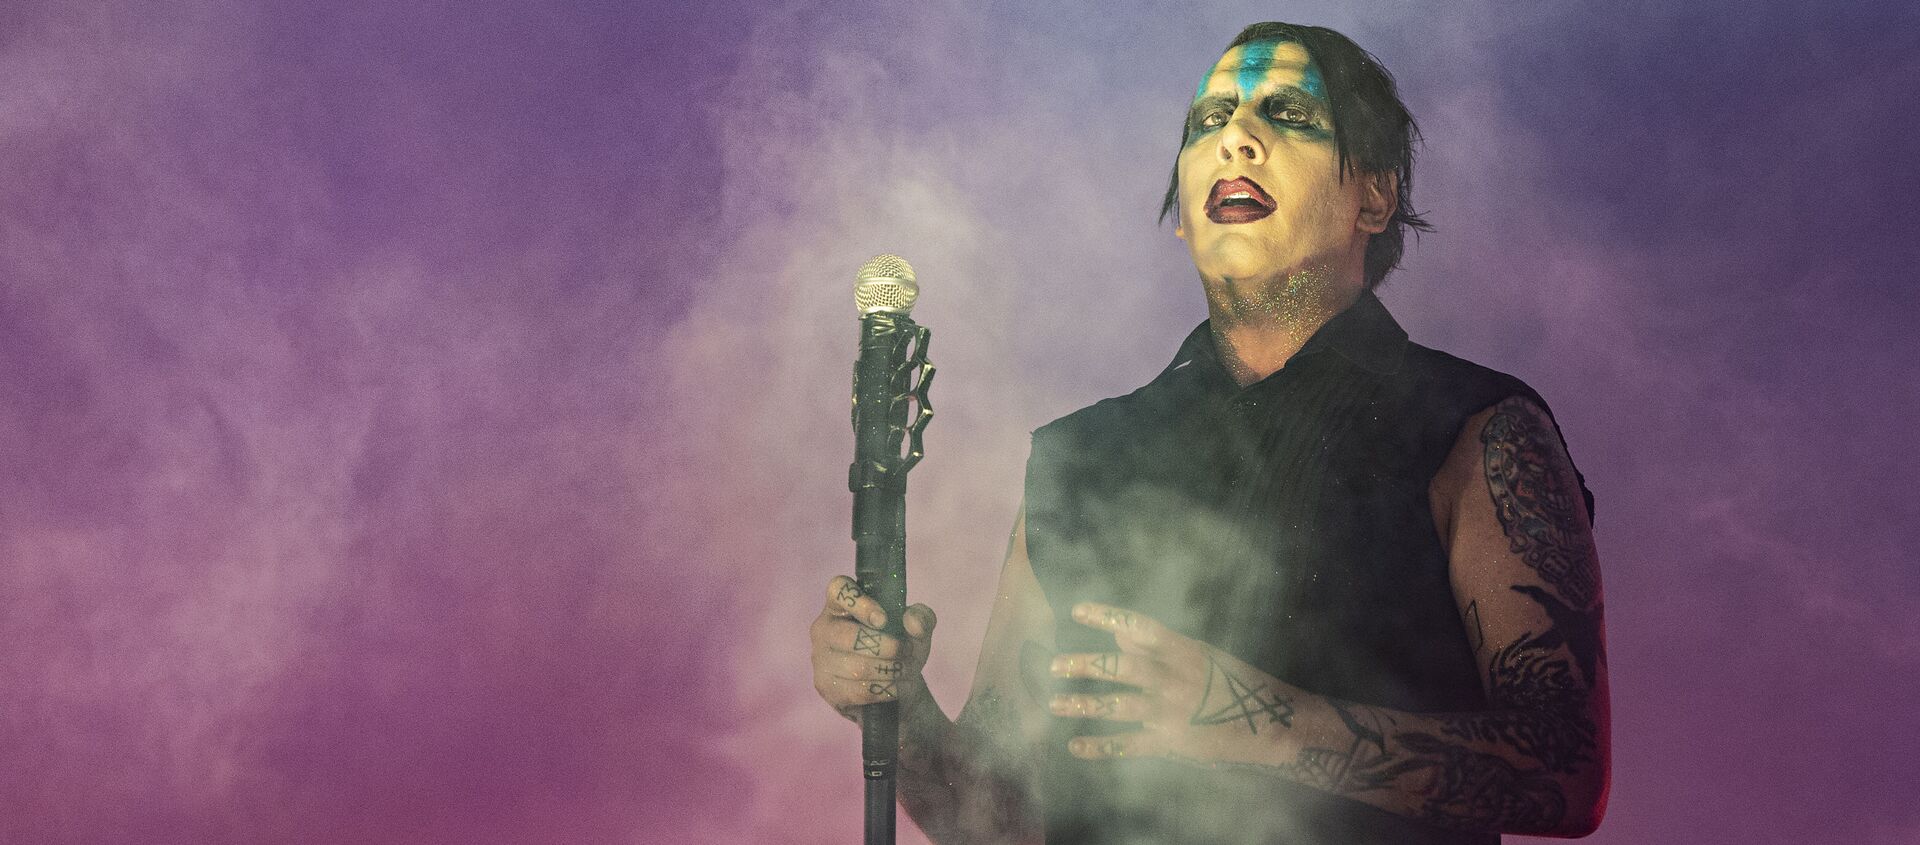 Marilyn Manson performs during Louder Than Life at Highland Festival Grounds at KY Expo Center on Sunday, Sept. 29, 2019, in Louisville, Ky. - Sputnik International, 1920, 11.02.2021